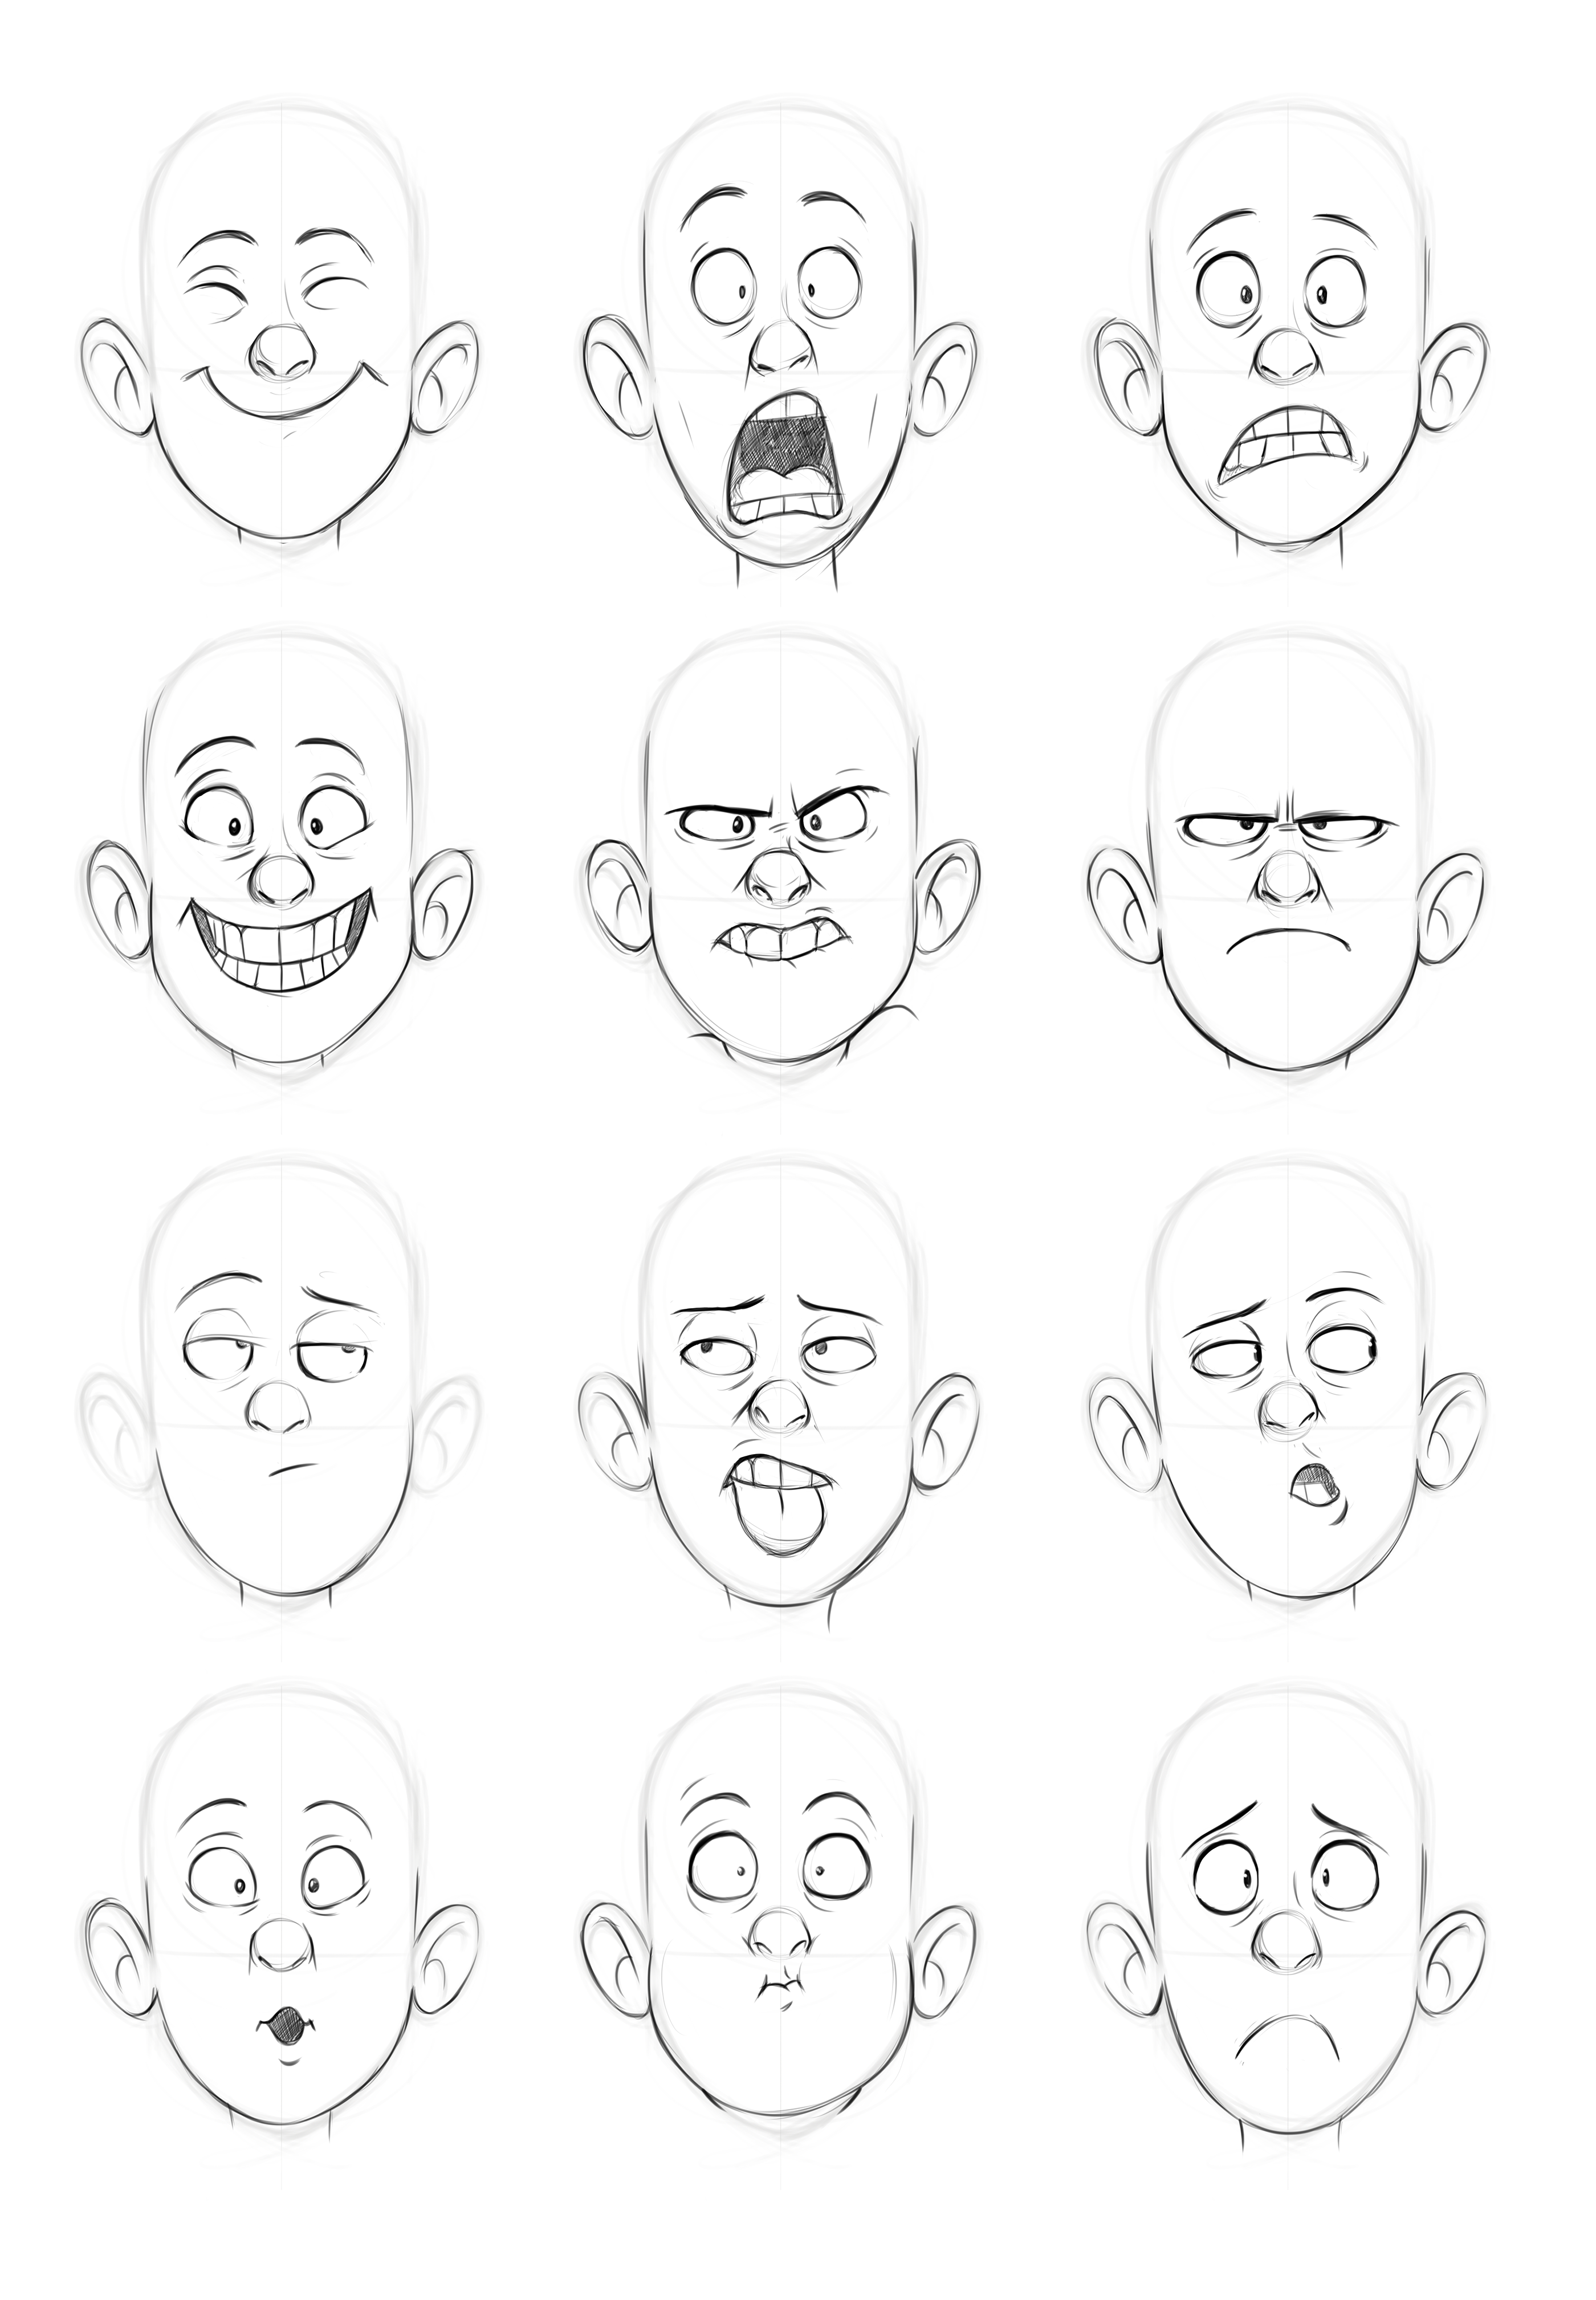 expressions happy frightened angry charicature faces cartoon.